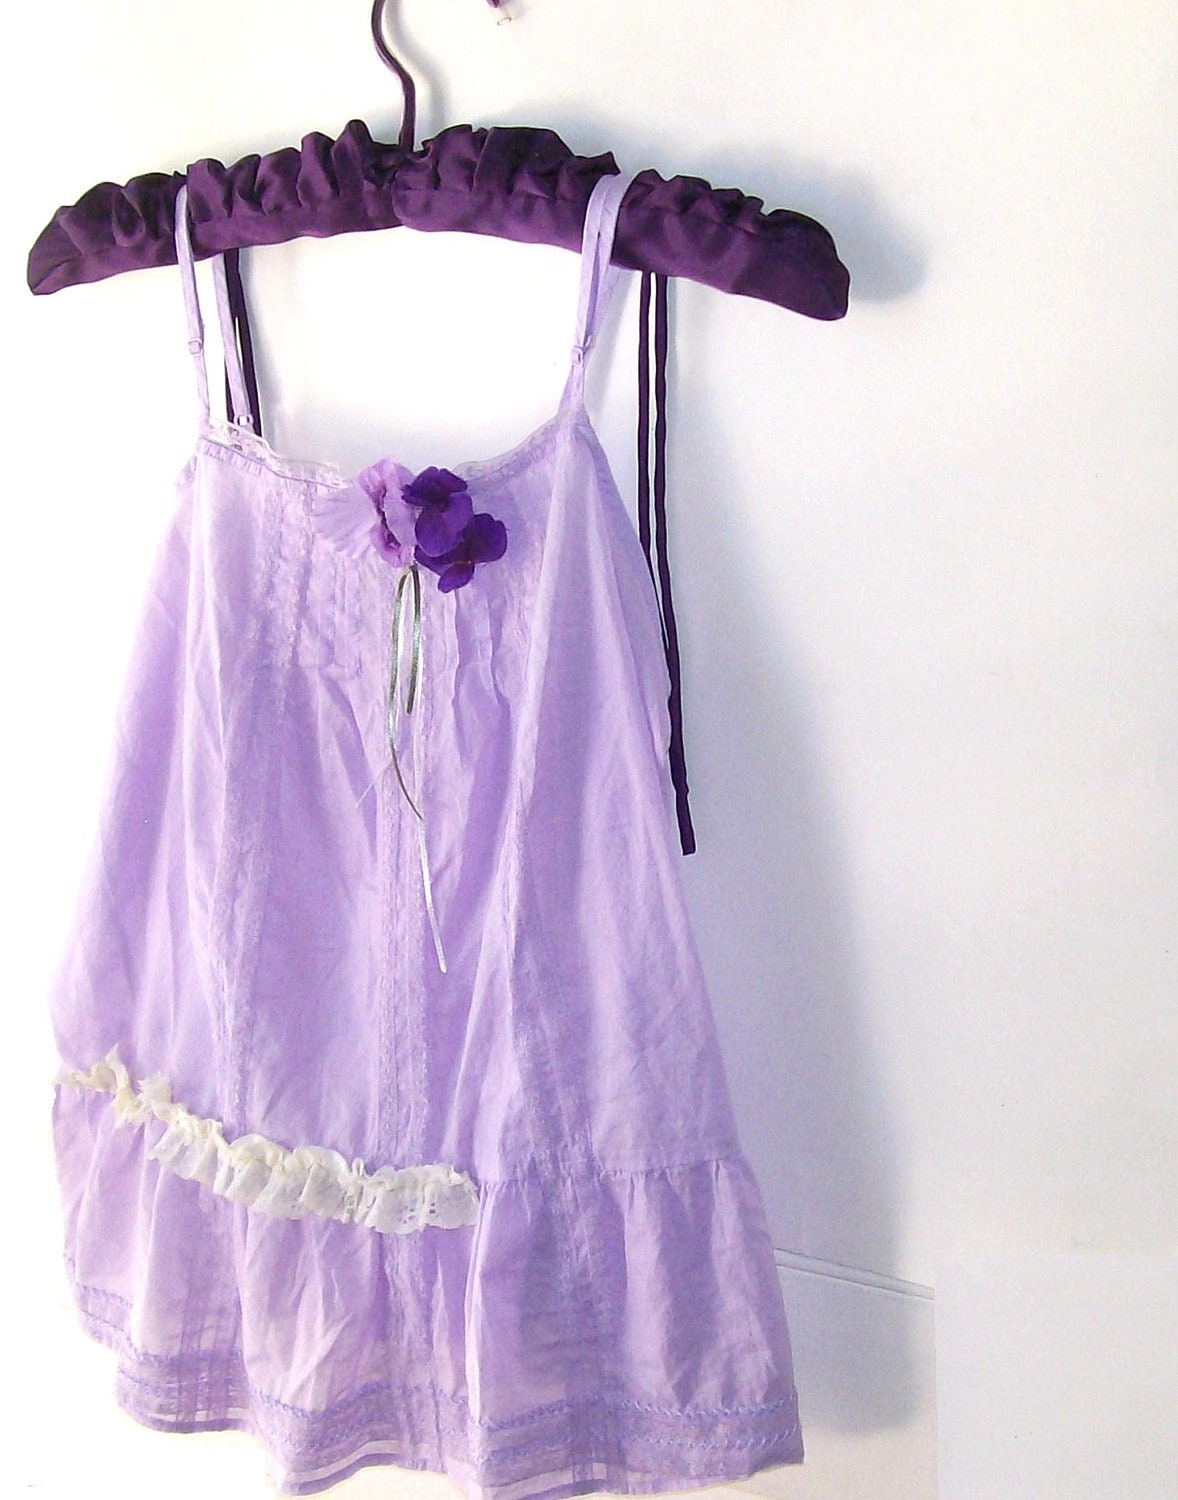 Romantic Prairie Country Girl Wear. Shabby Bohemian. Lavendar. Peasant top. Camisole.Pansies and Violets